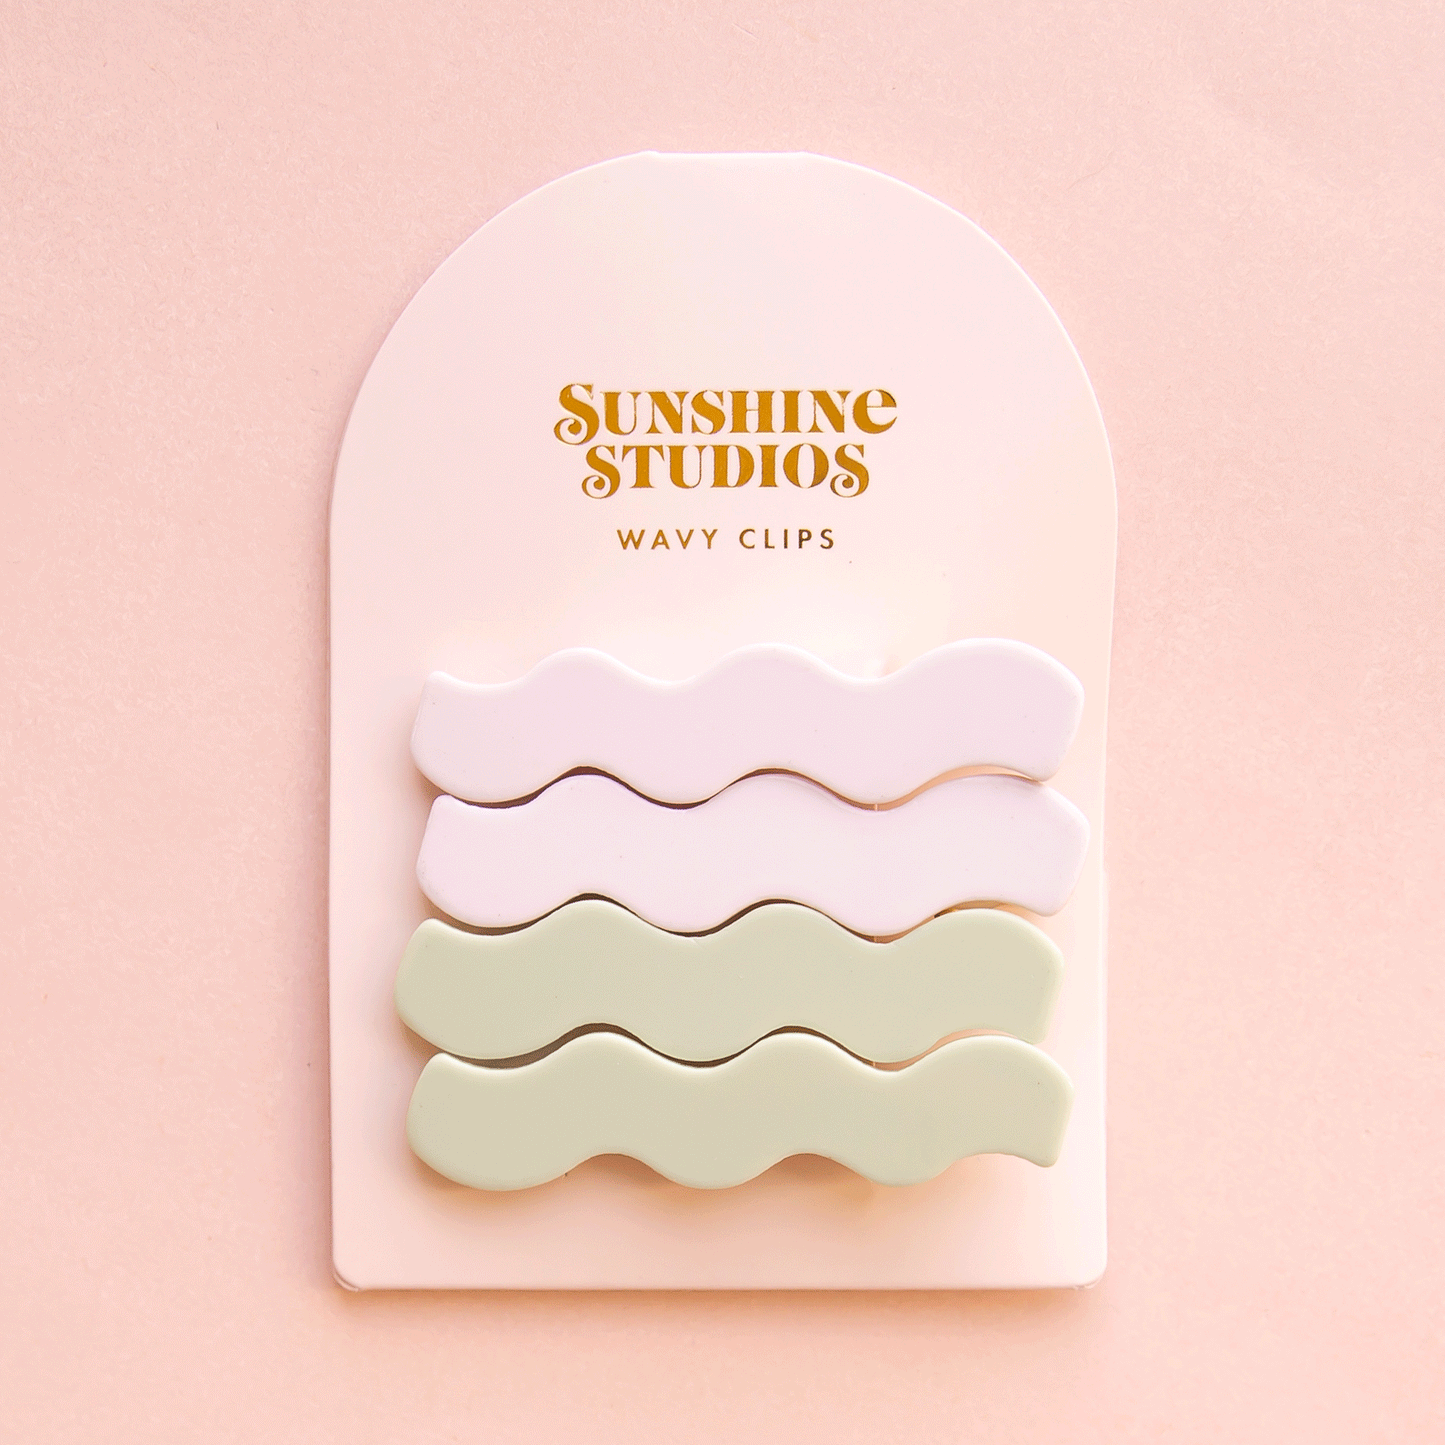 On a pink background is two sets of wavy shaped hair clips in a light green/blue shade and shade of white on an arched packaging with text along the top that reads, "Sunshine Studios".